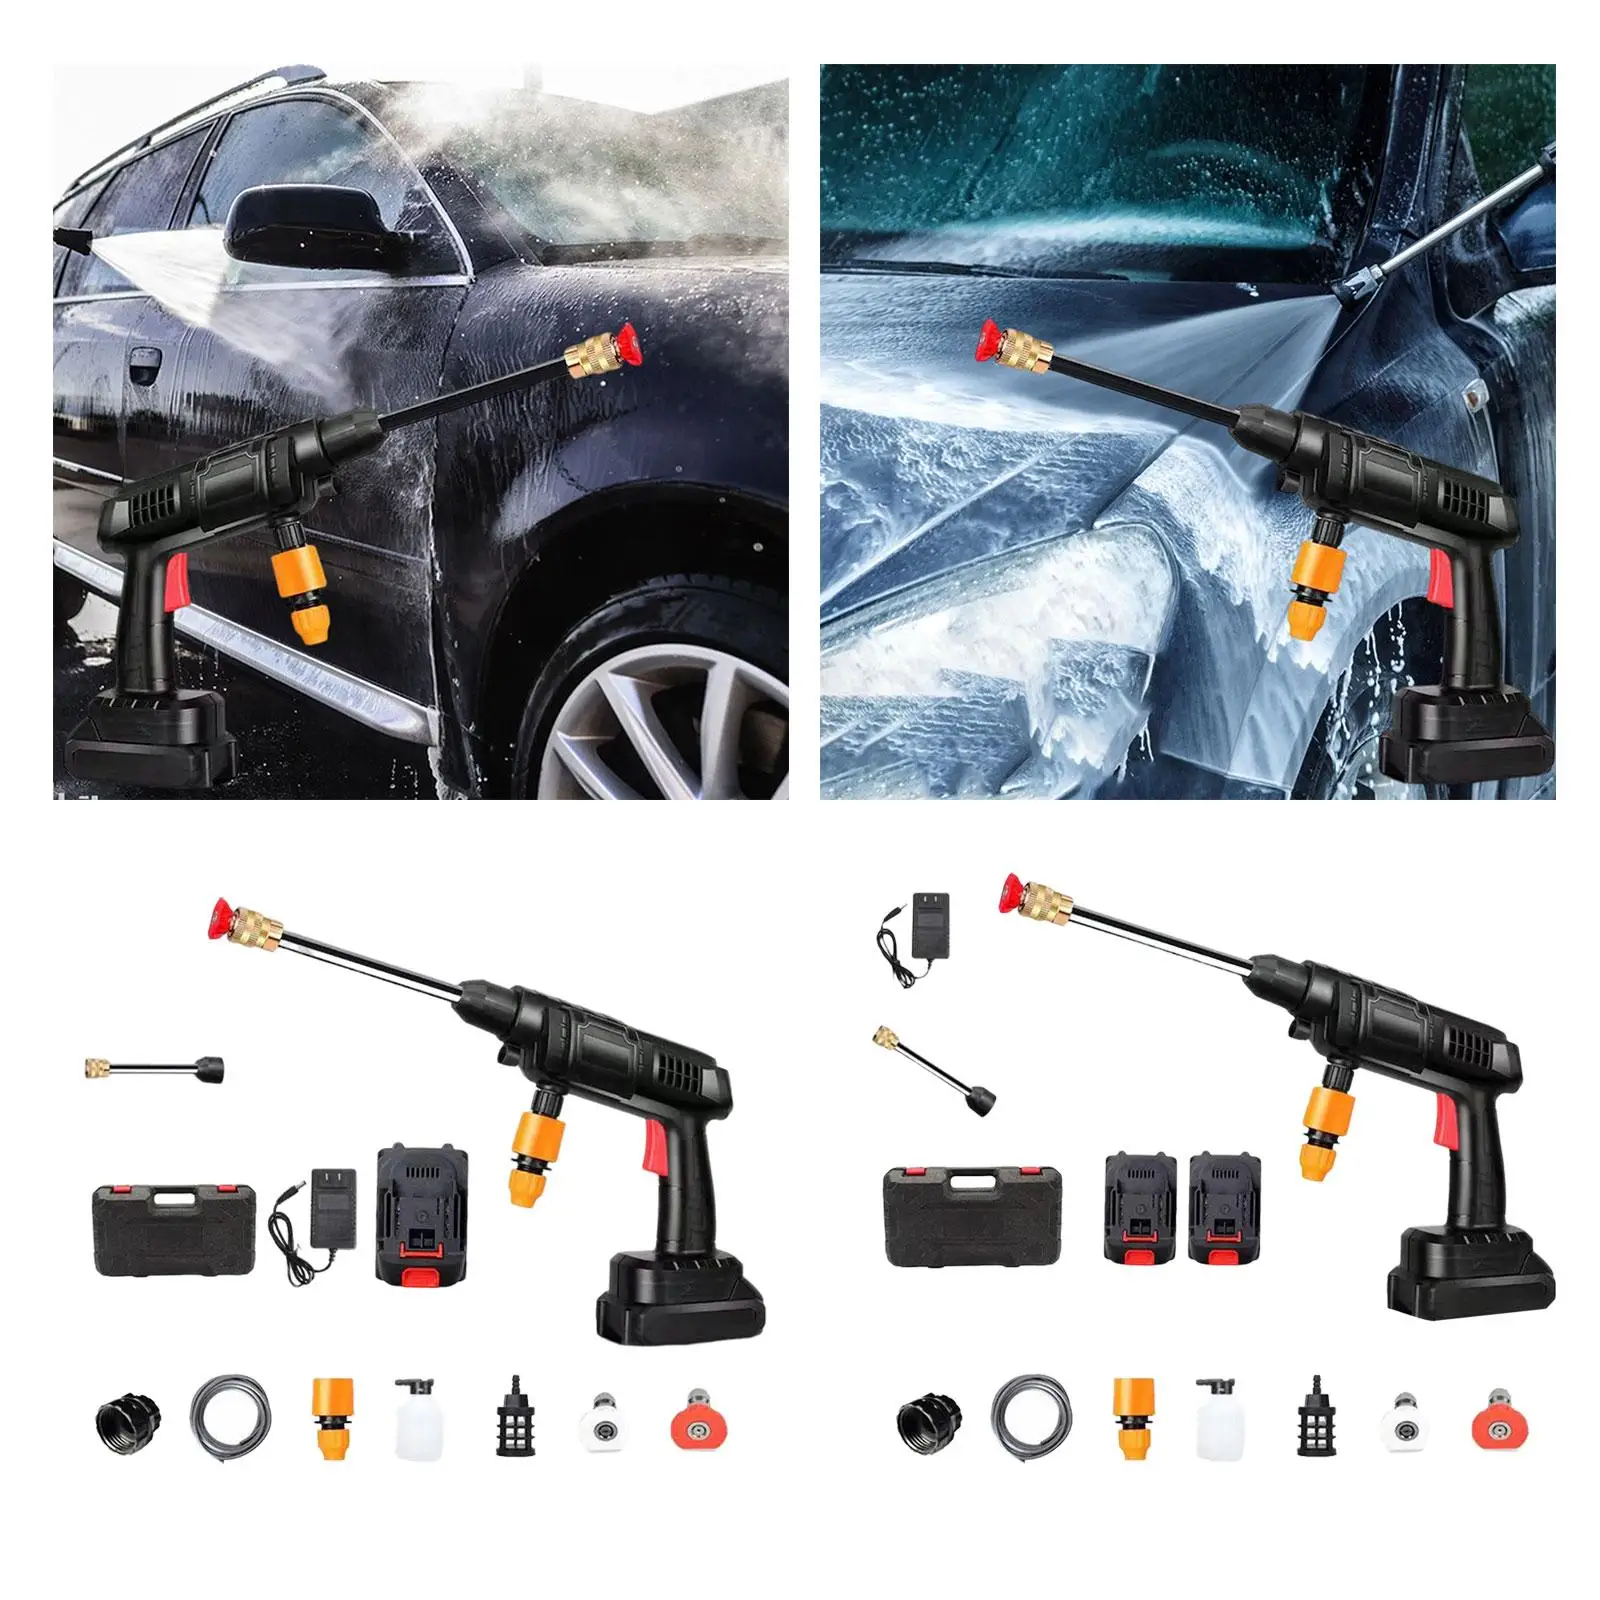 Water Spray Machine with Water Hose Foam Spray Bottle Fitting Cleaner High Pressure Washer for Driveways Car Home Washing Yard